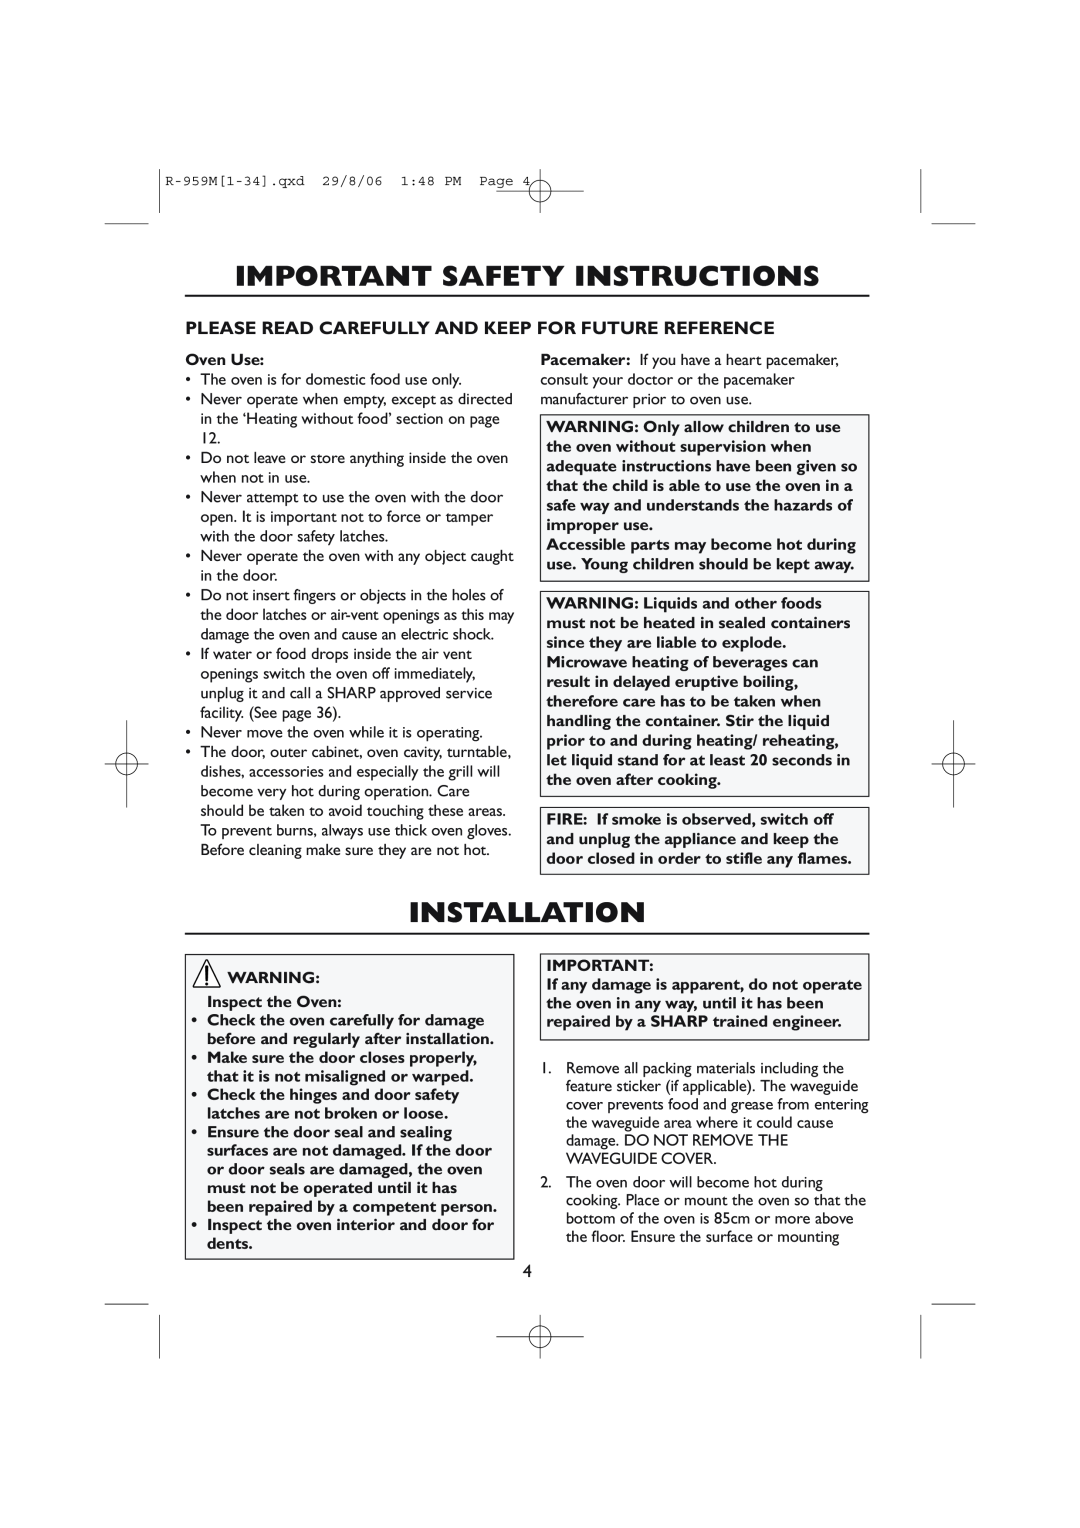 Sharp R-98STM-A Important Safety Instructions, Installation, Please Read Carefully And Keep For Future Reference, Oven Use 